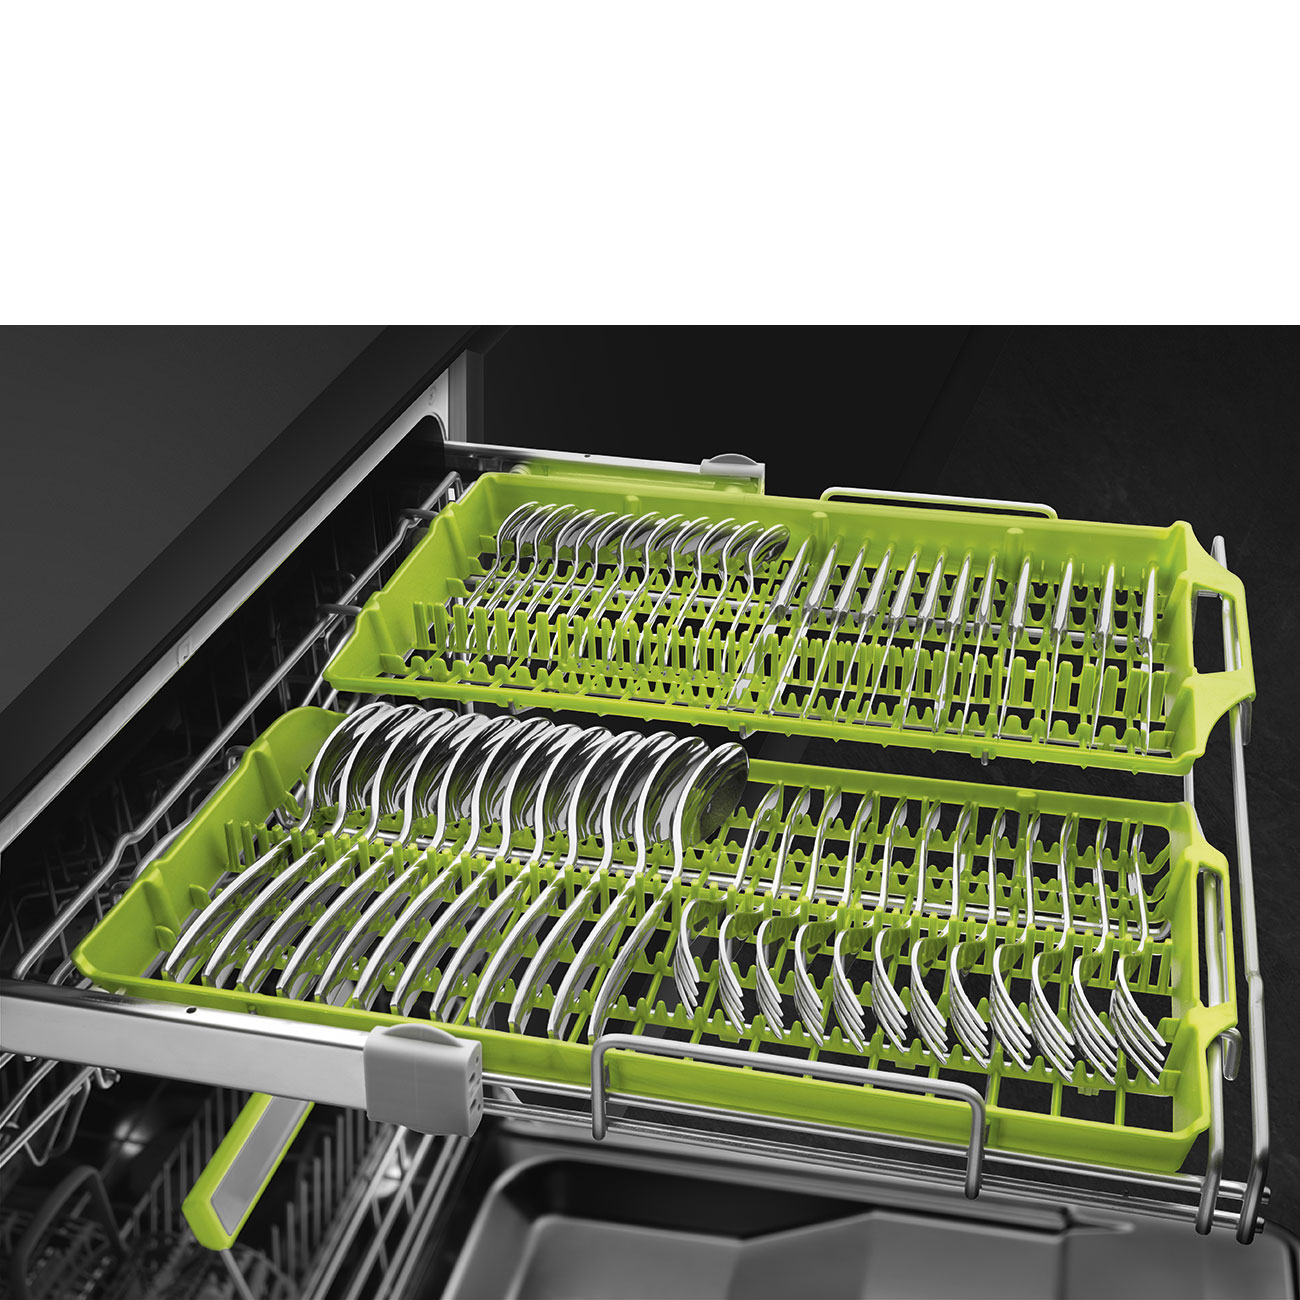 Partially-integrated built-in dishwasher 60 cm Smeg_8